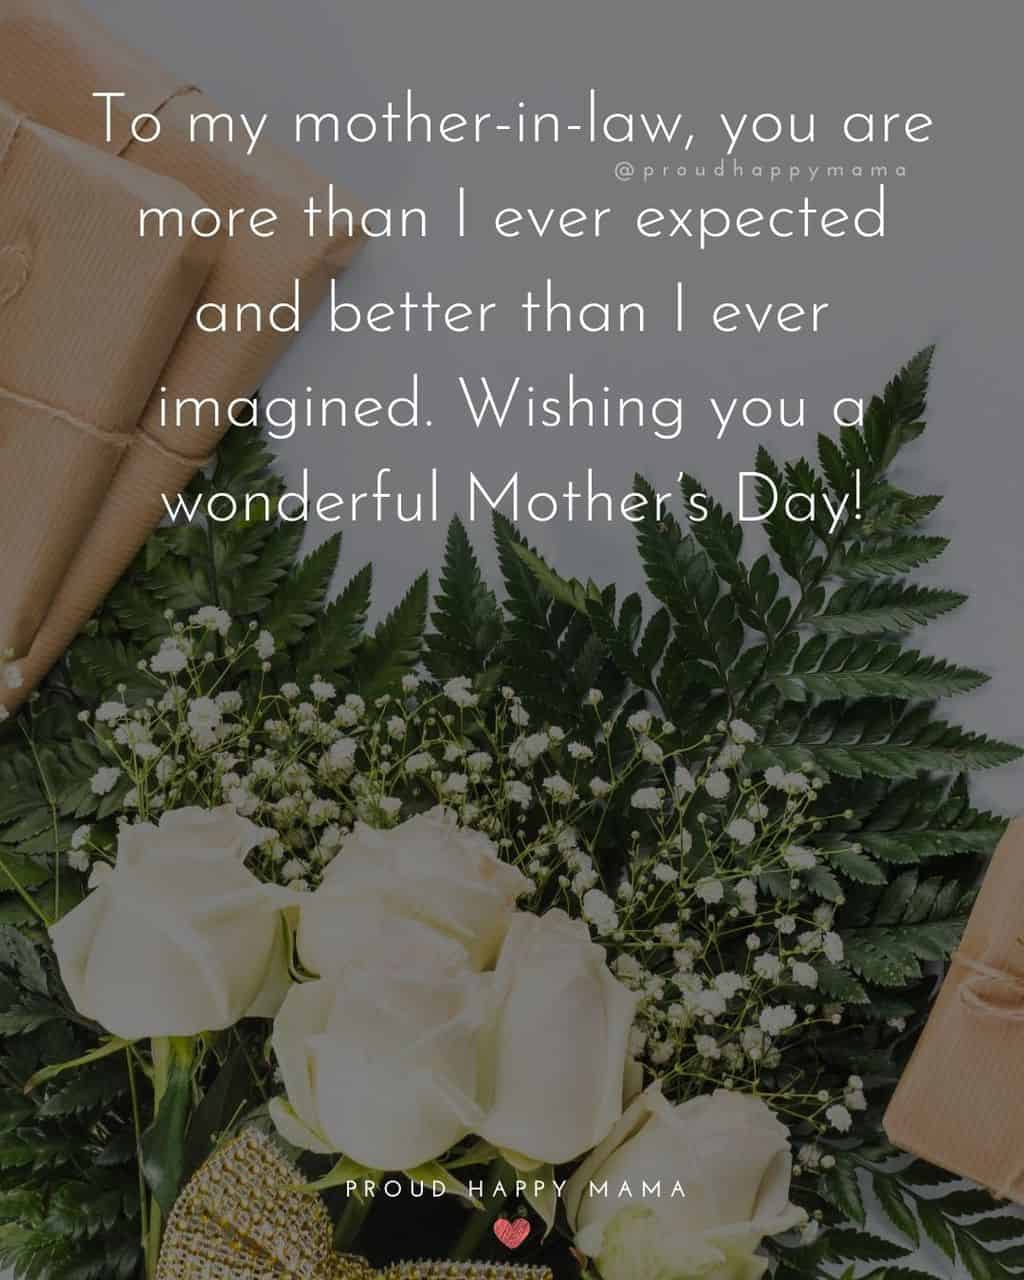 Happy Mothers Day Quotes For Mother In Law - To my mother in law, you are more than I ever expected and better than I ever imagined.